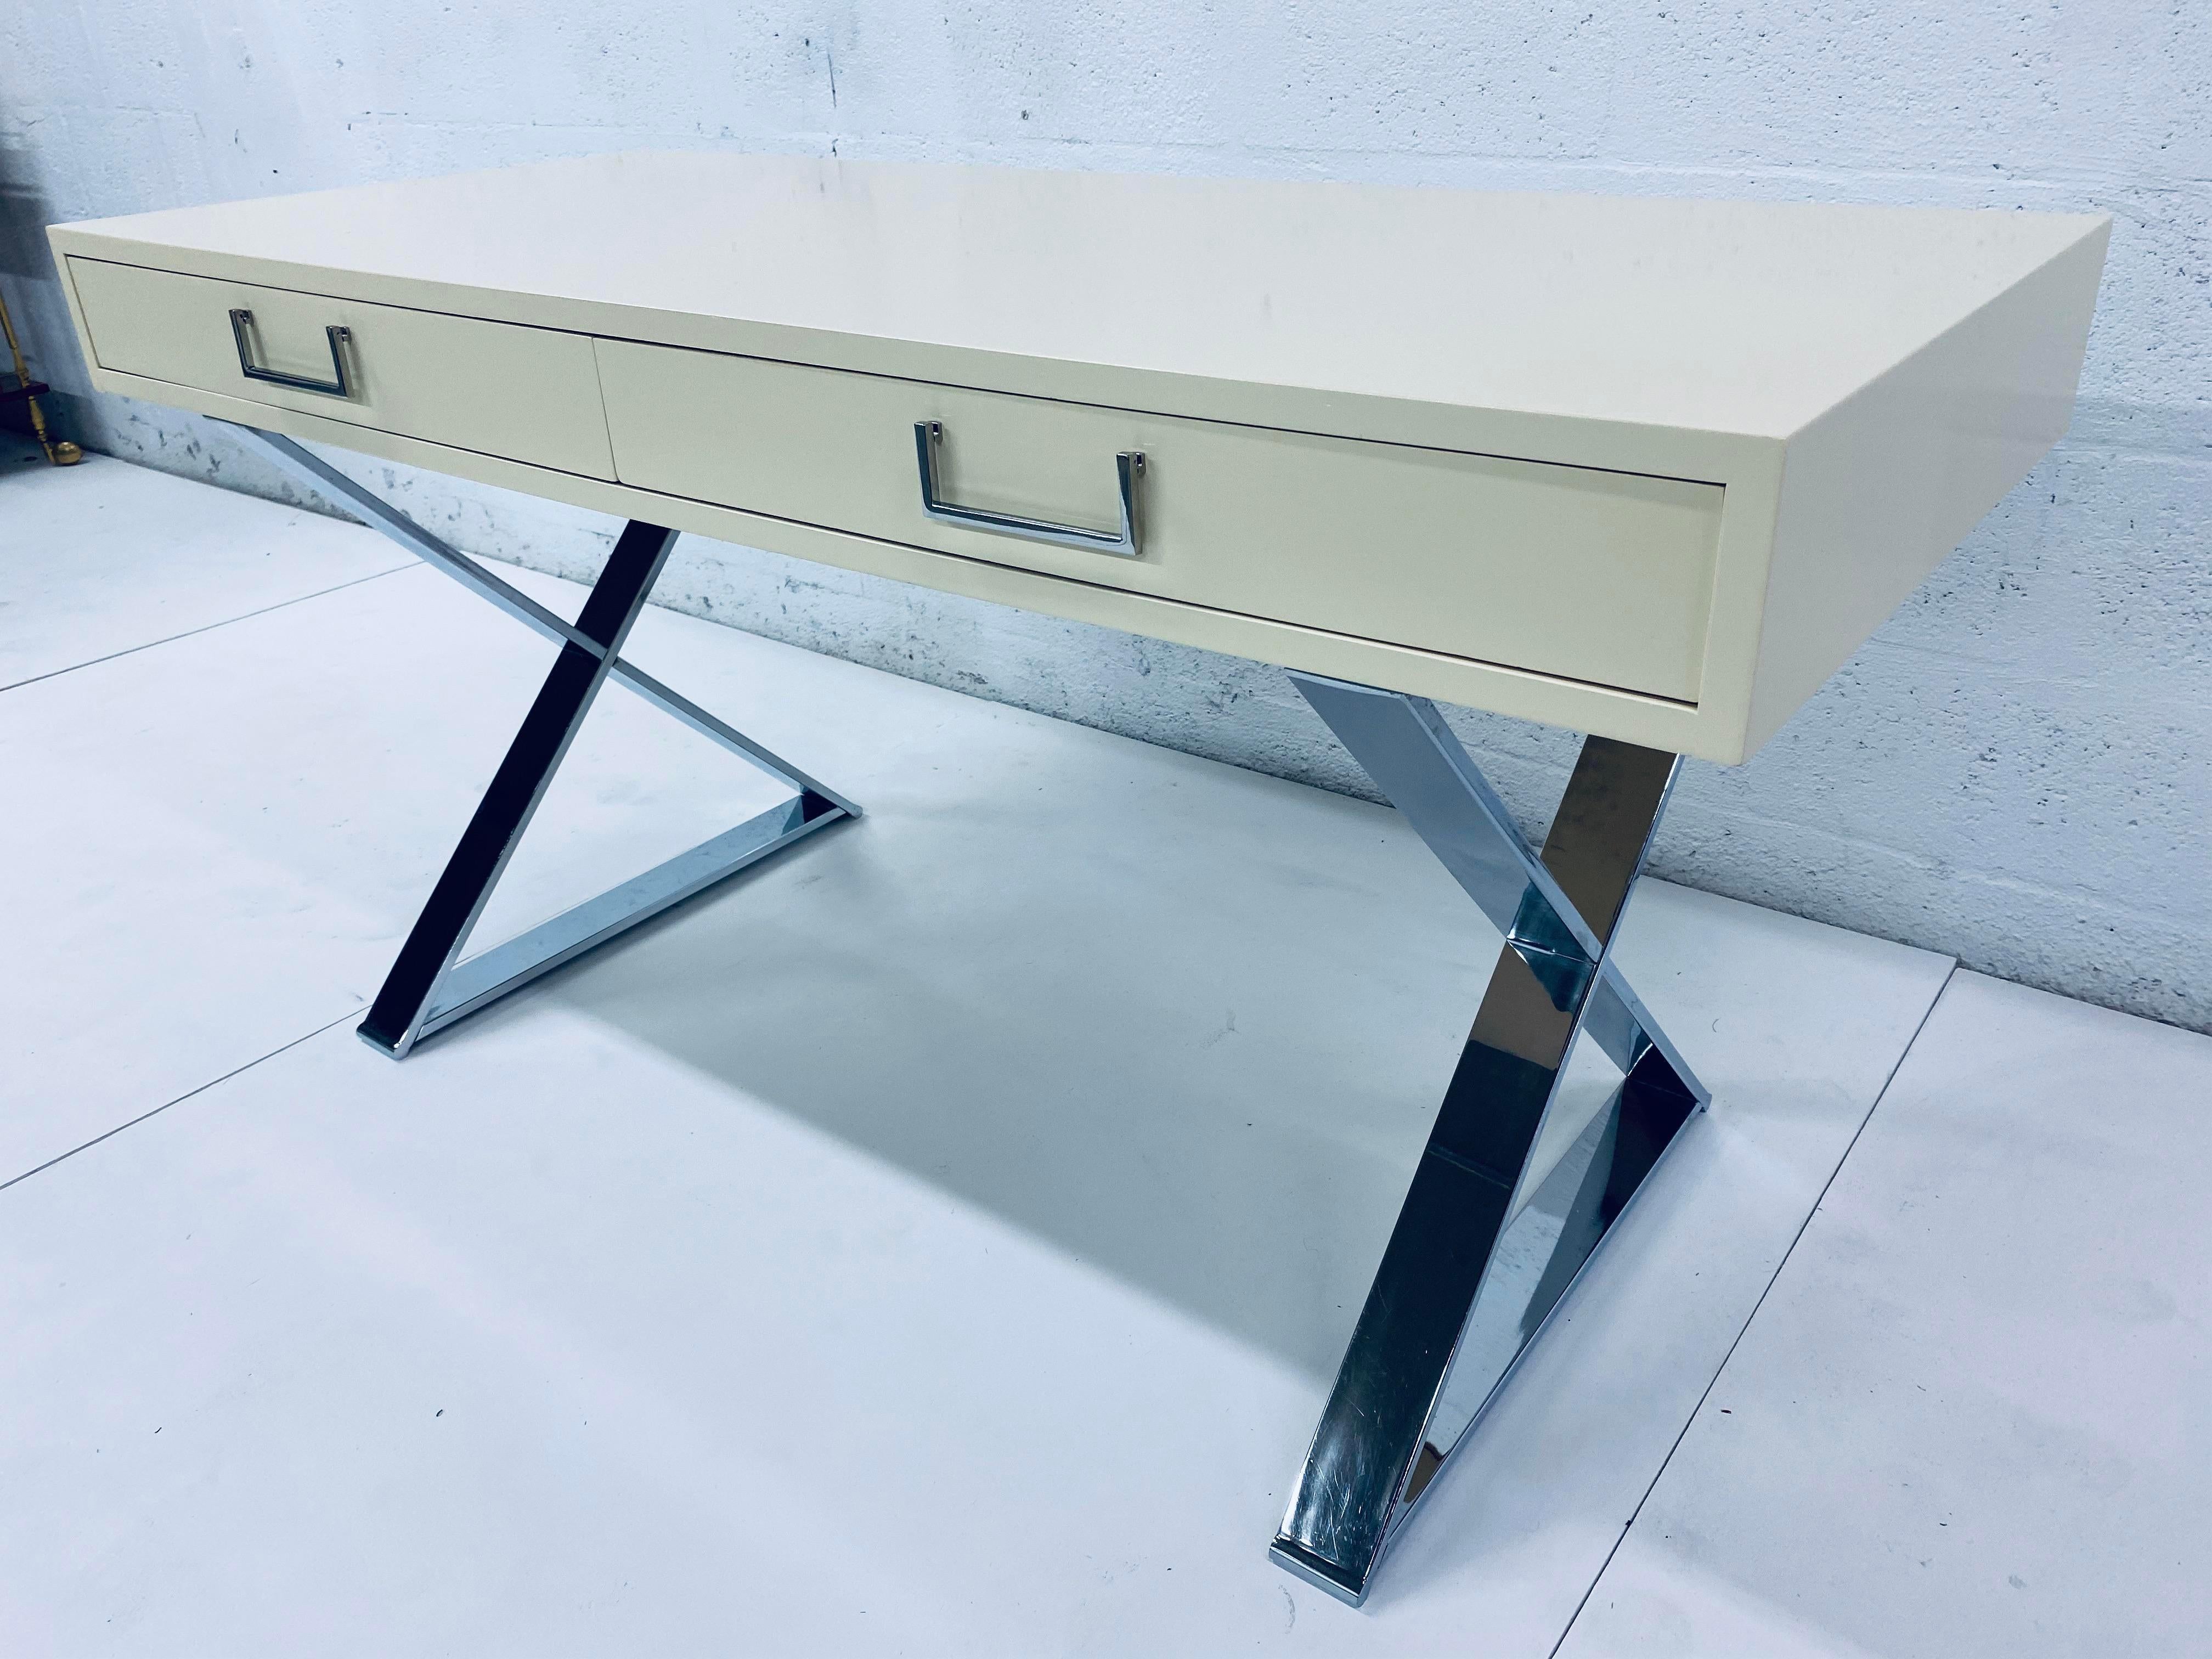 Lacquered antique white West Michigan Furniture Campaign desk for John Stuart. Writing desk sits on two chrome X frames and contains two large drawers with hinged chrome pulls. This piece has been expertly restored with a new lacquer finish and the